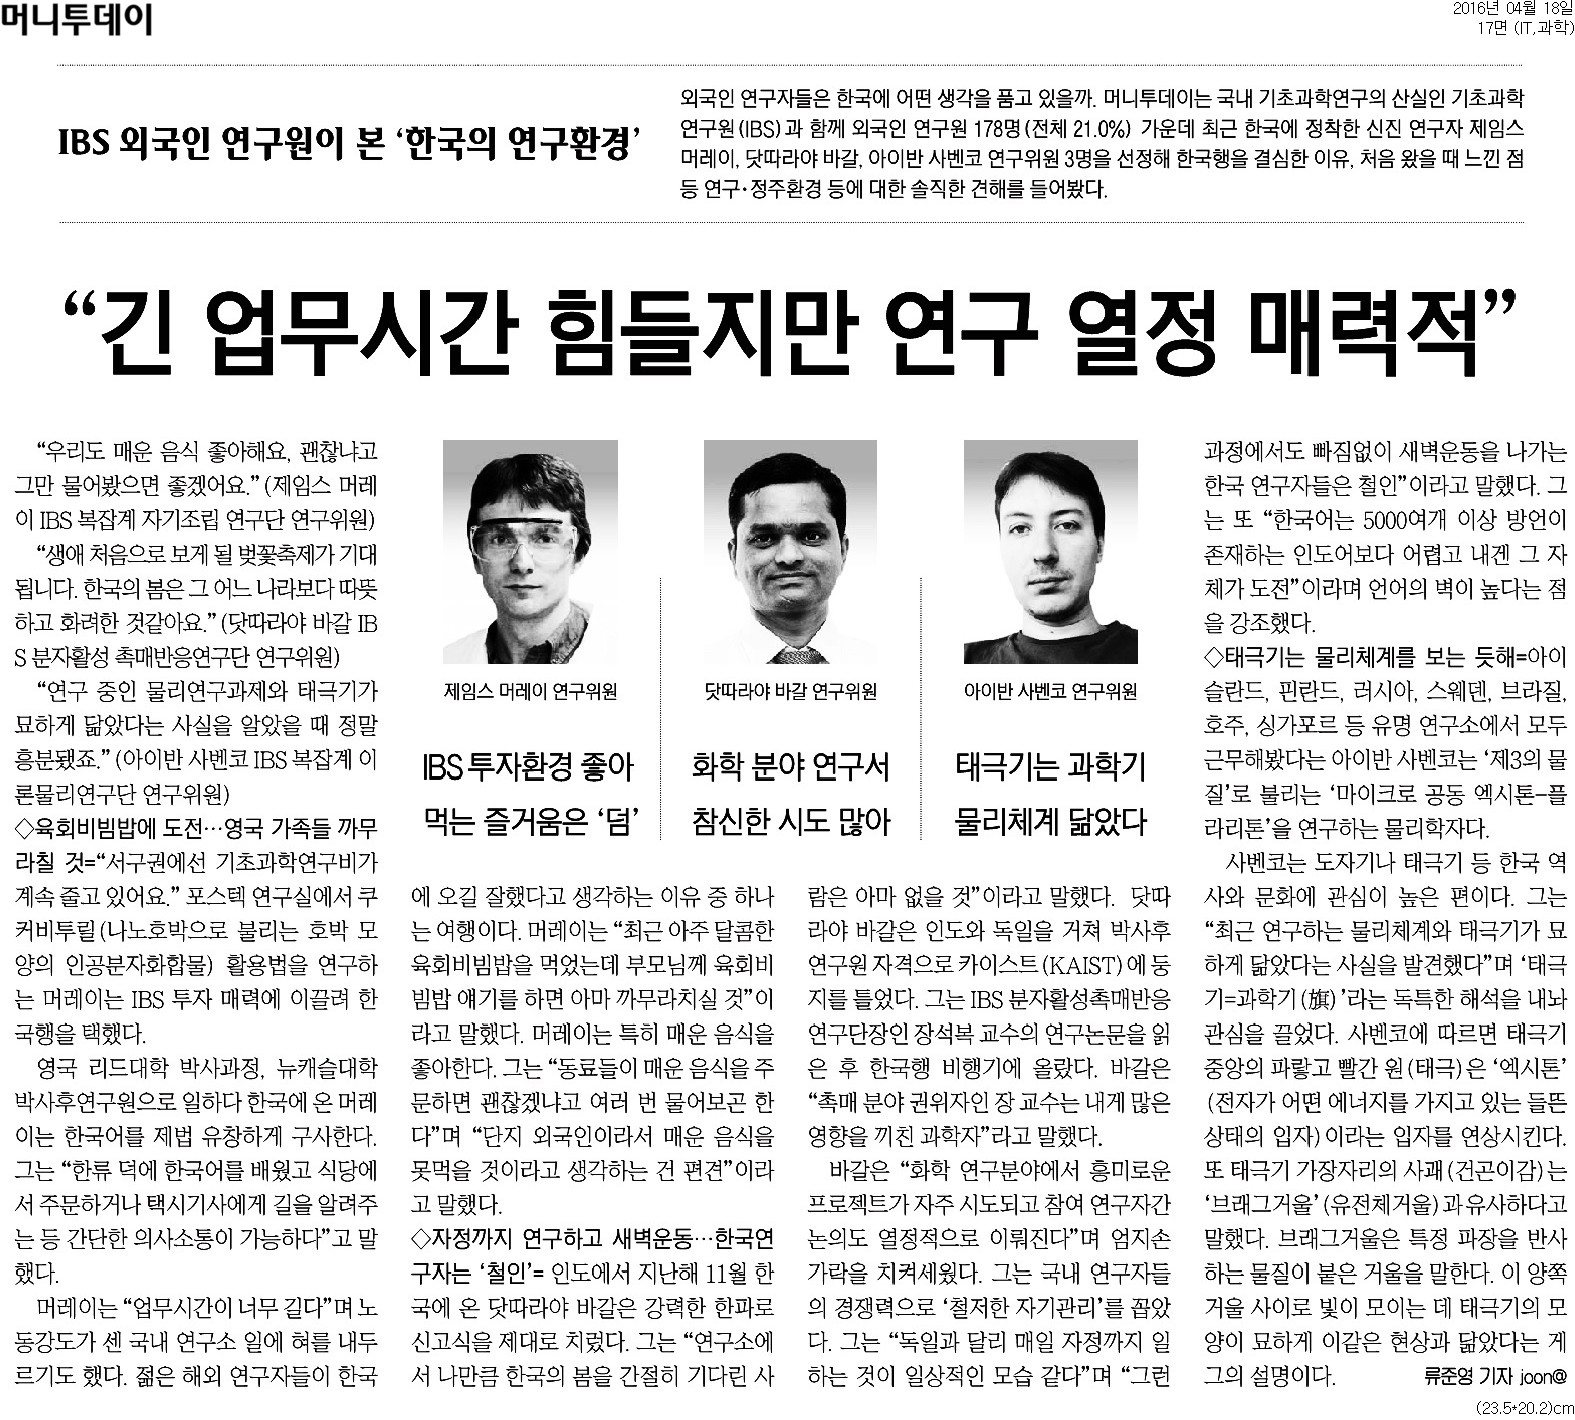 [Korean Media] Interview with IBS foreign researchers 사진